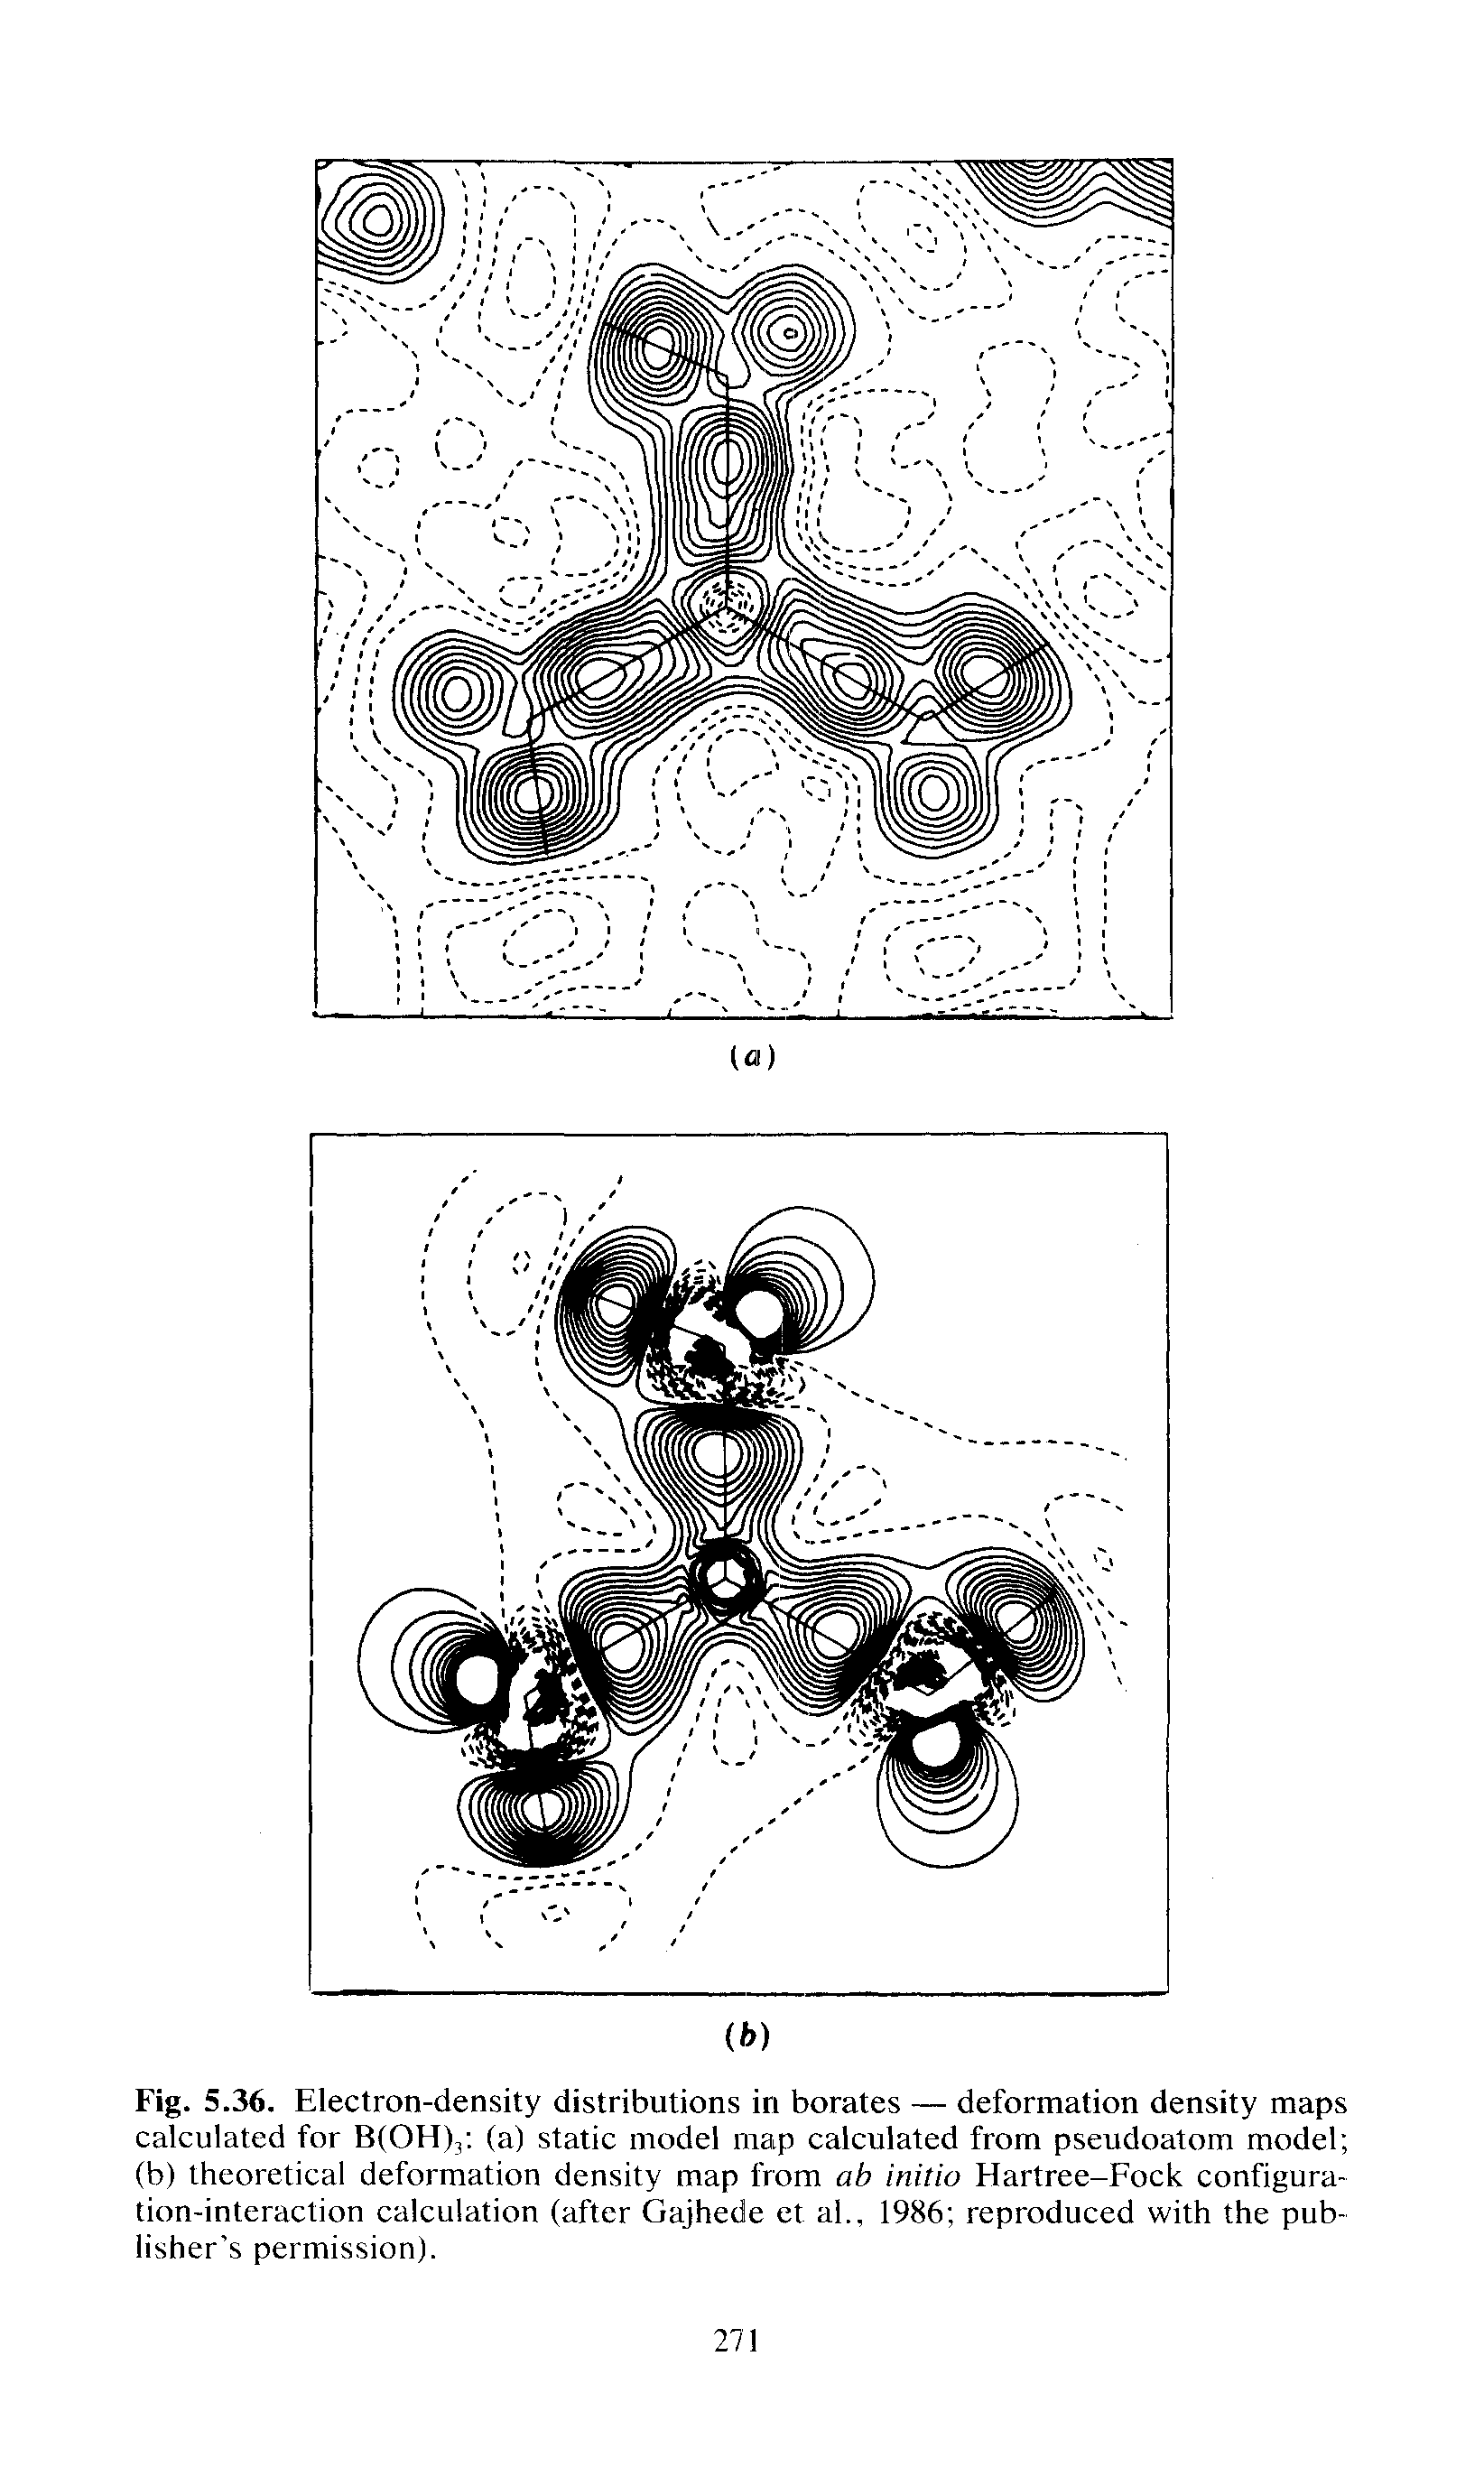 Fig. 5.36. Electron-density distributions in borates — deformation density maps calculated for BlOHlj-. (a) static model map calculated from pseudoatom model (b) theoretical deformation density map from ab initio Hartree-Fock configuration-interaction calculation (after Gajhede et al., 1986 reproduced with the publisher s permission).